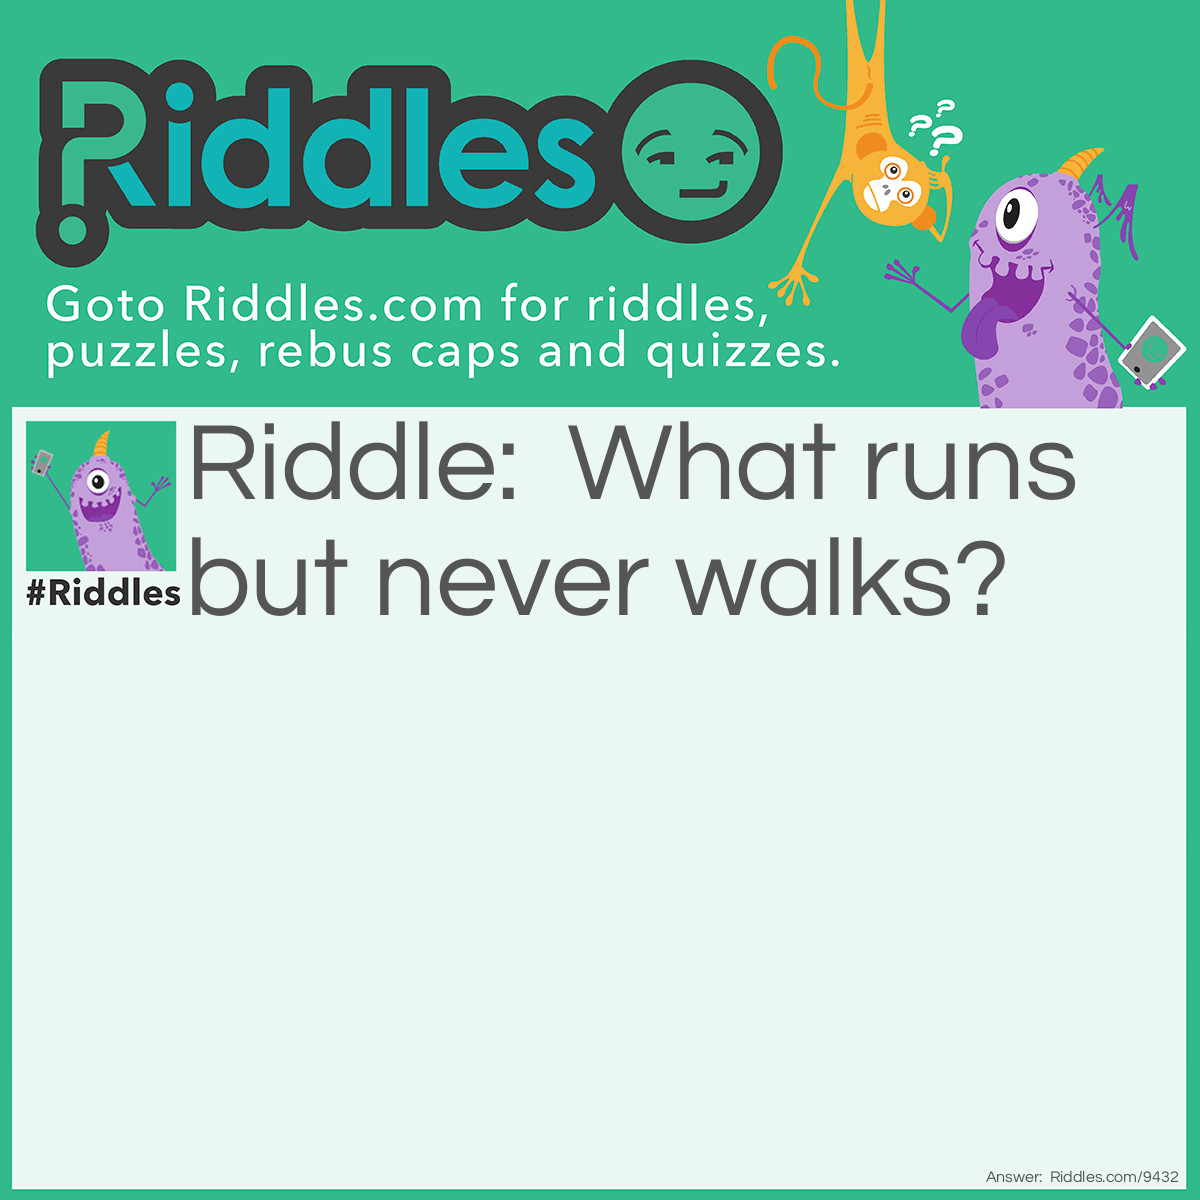 Riddle: What runs but never walks? Answer: Water or a tap.